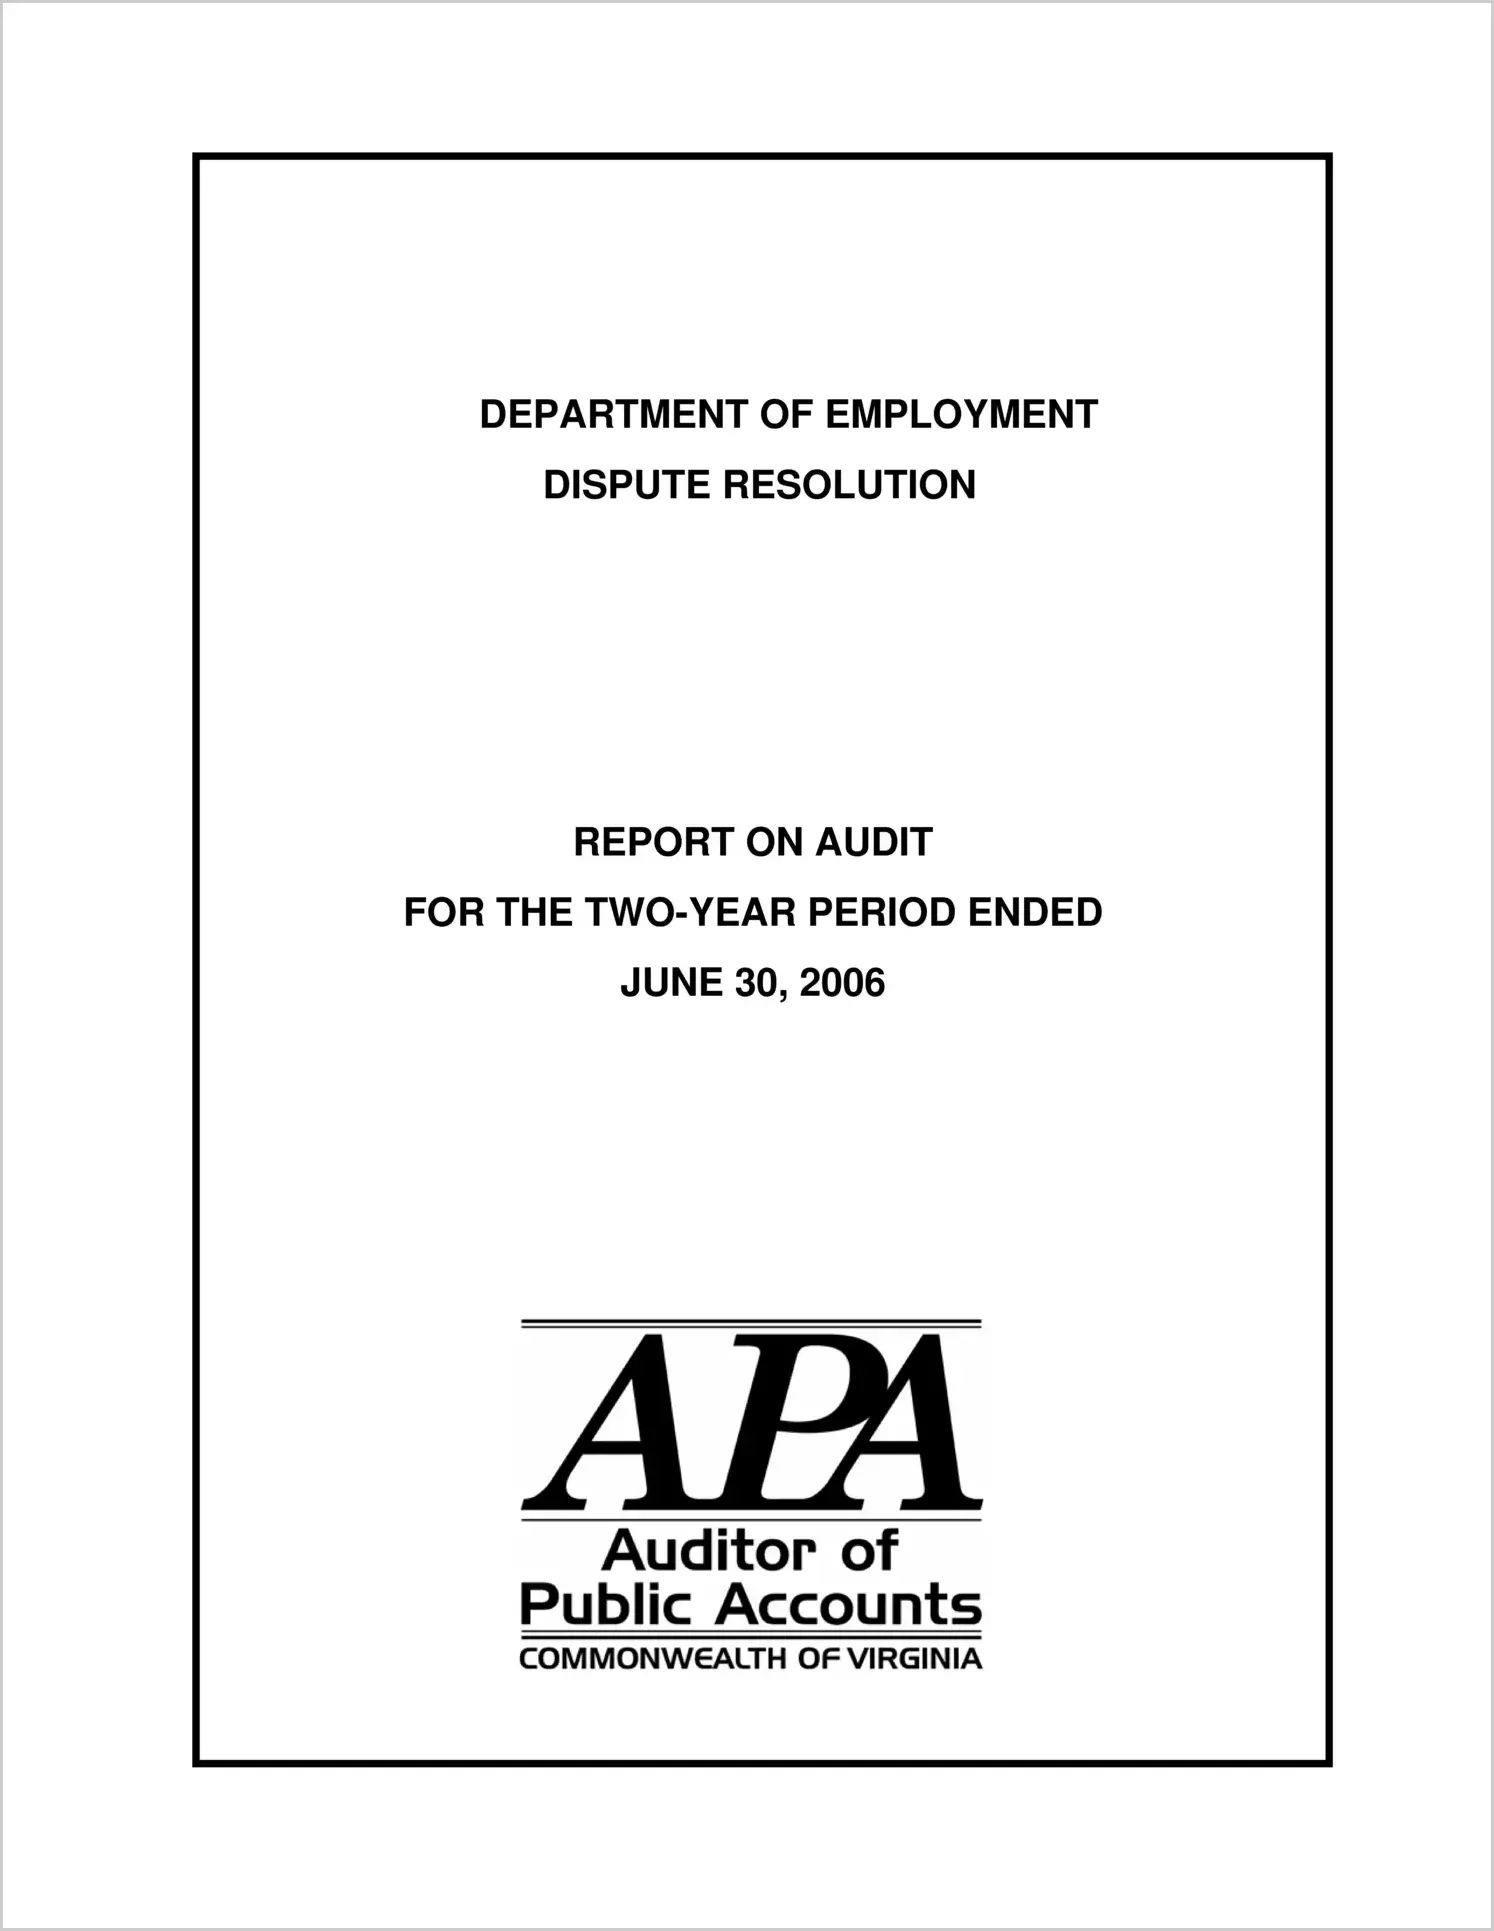 Department of Employment Dispute Resolution for the two-year period ended June 30, 2006